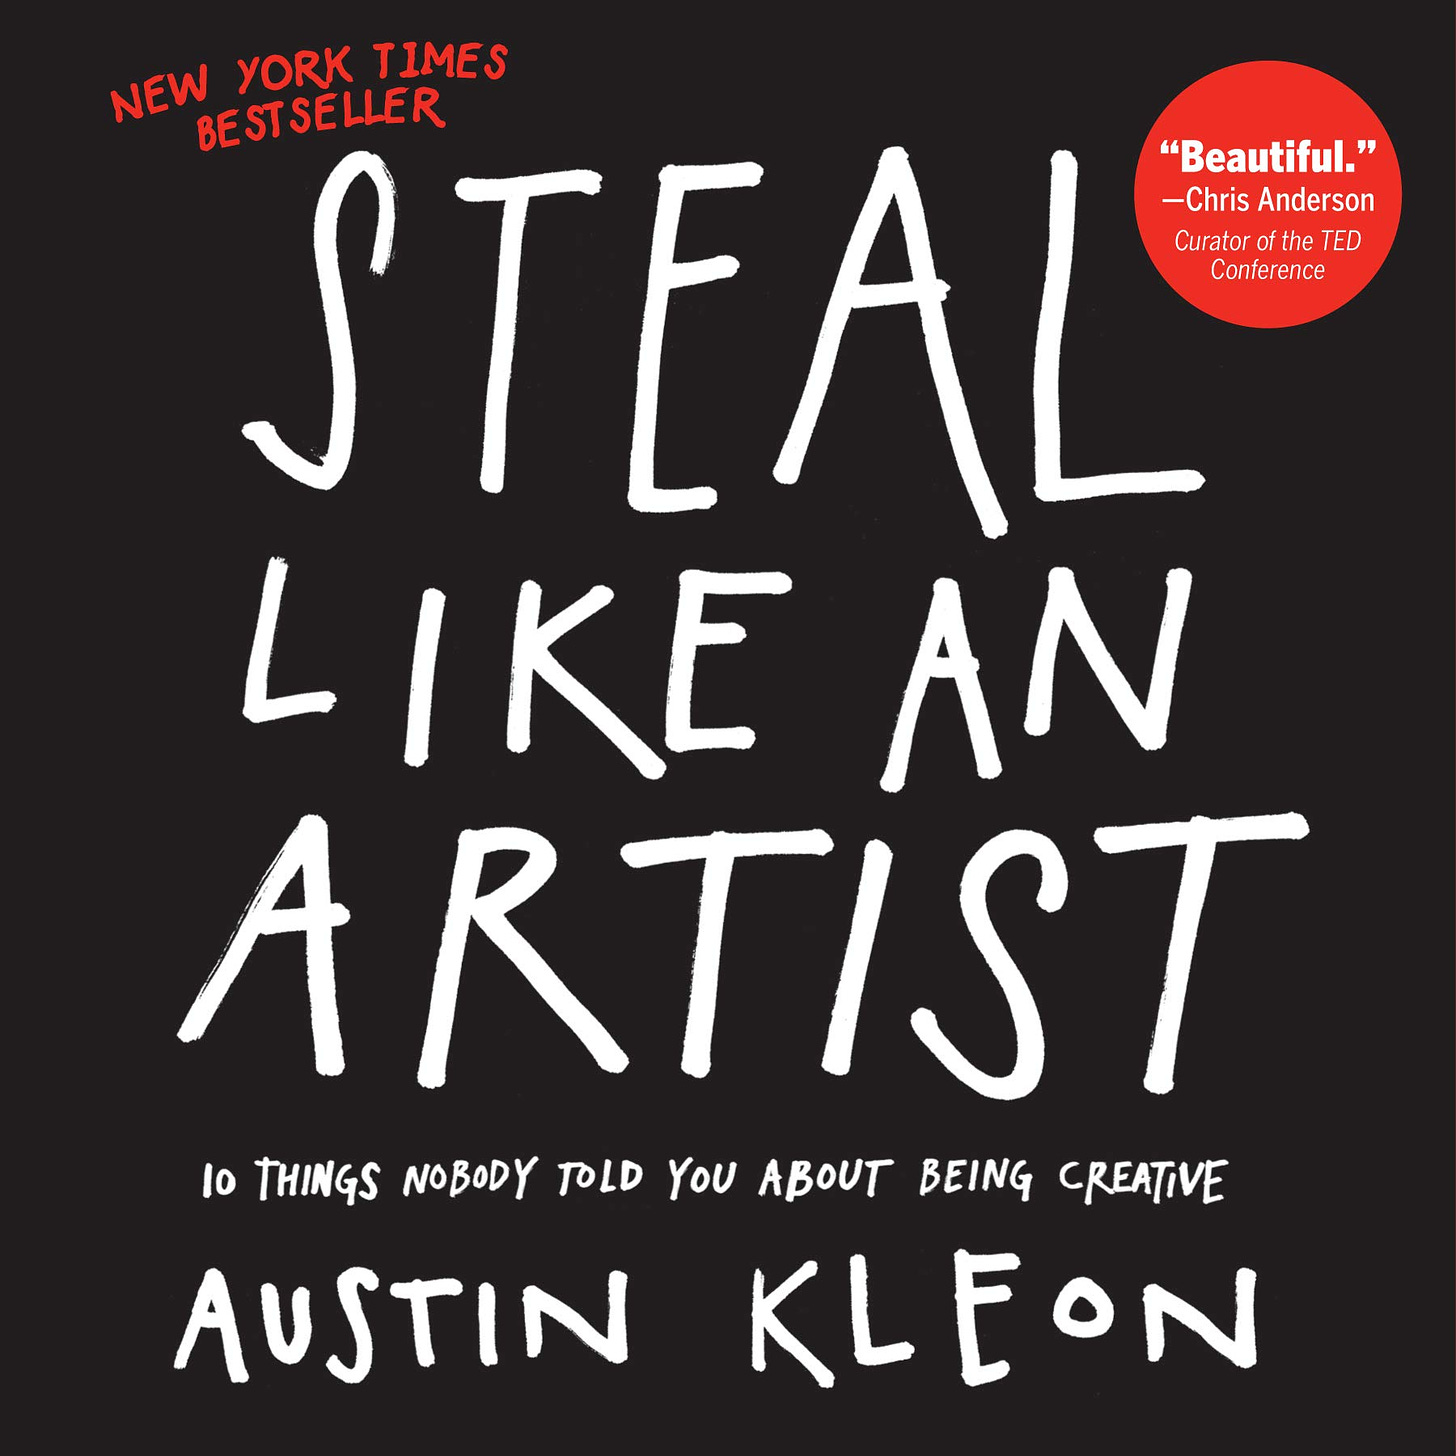 steal like an artist book cover